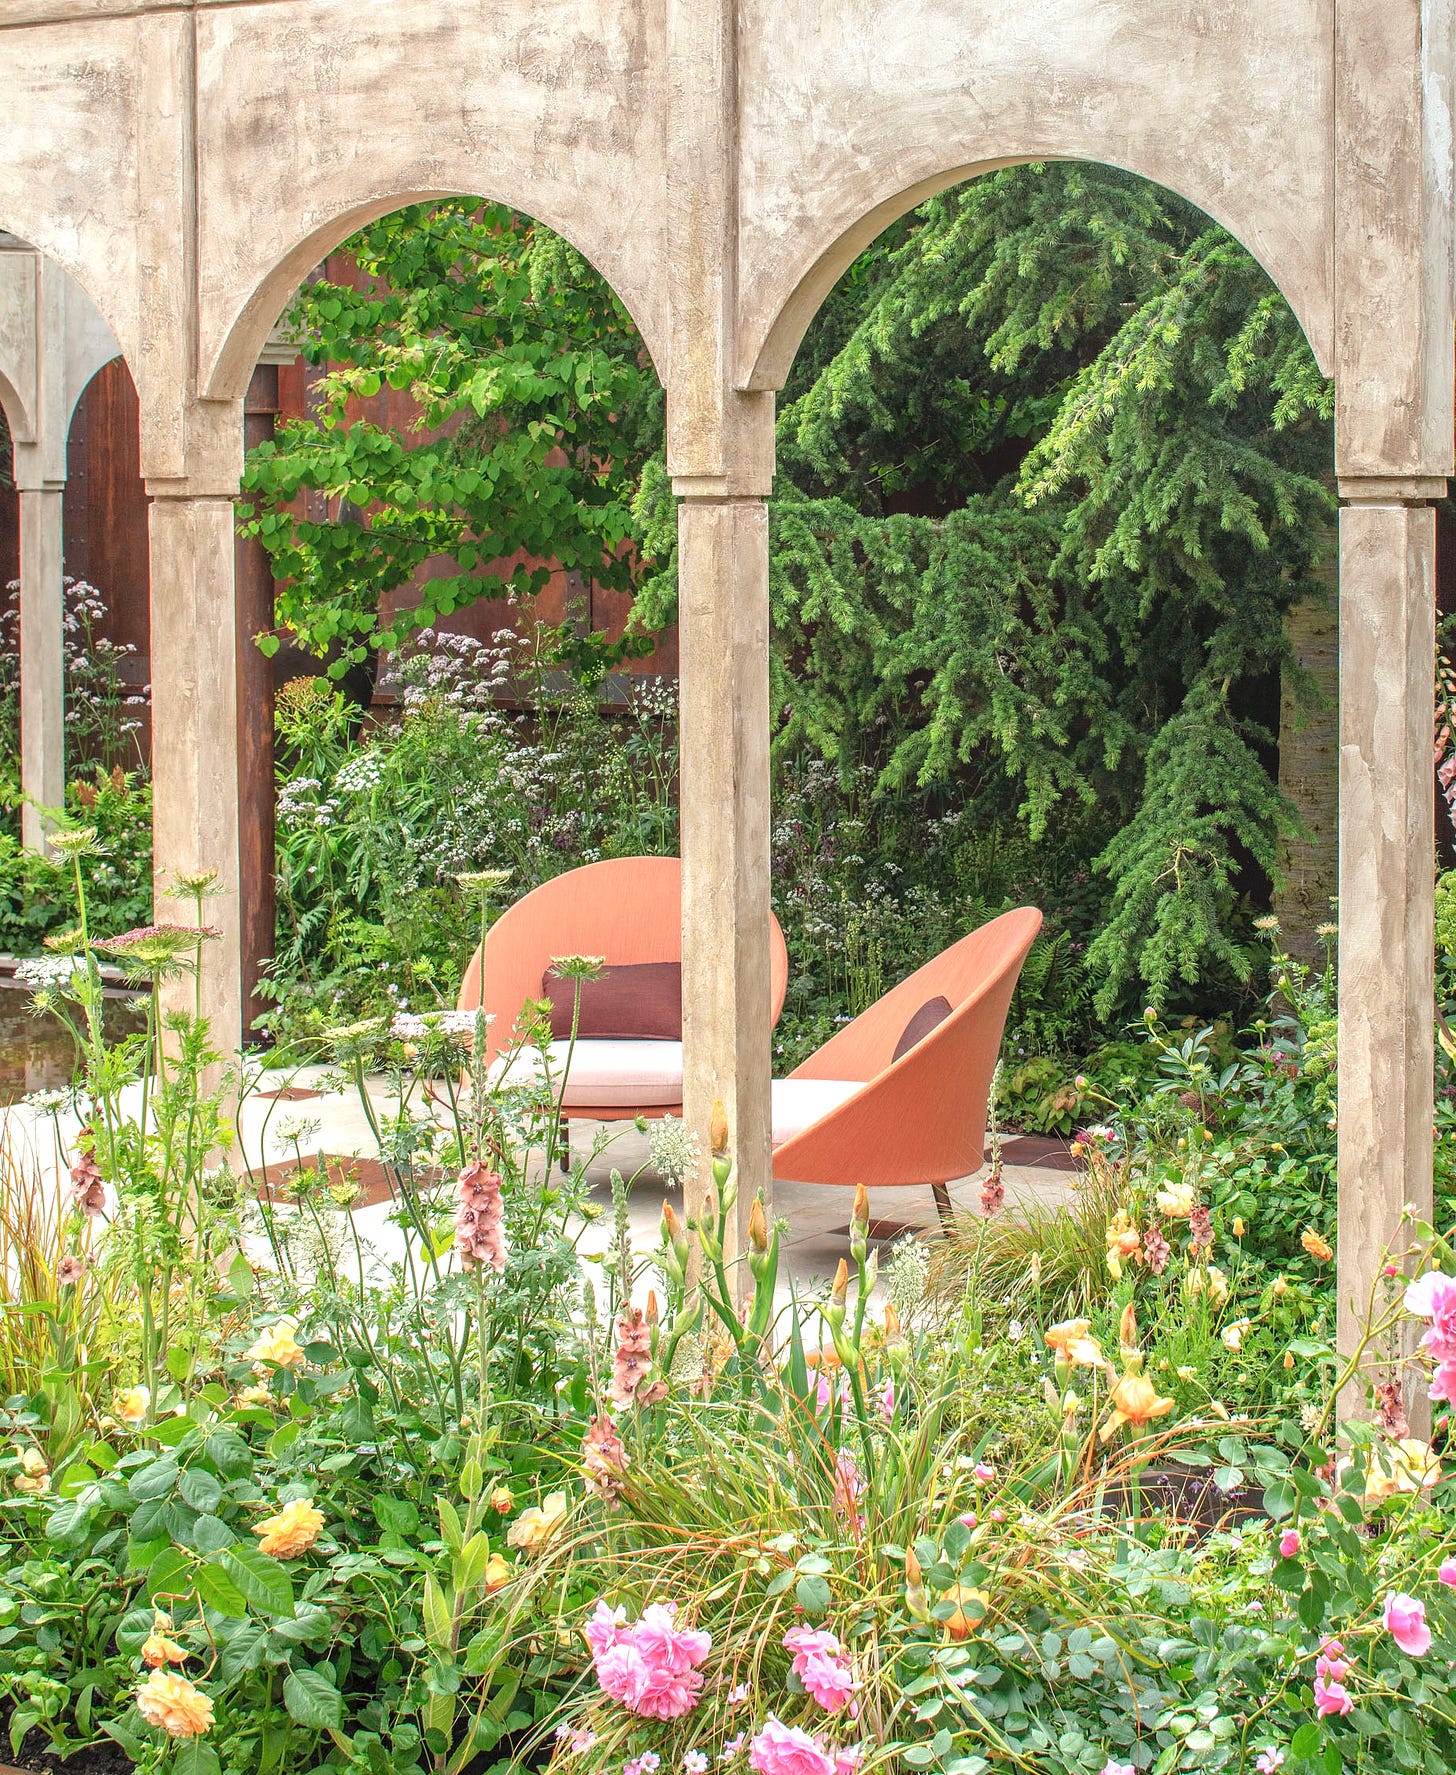 Chelsea flower show garden with arched structure and two orange chairs amongst pretty cottage planting